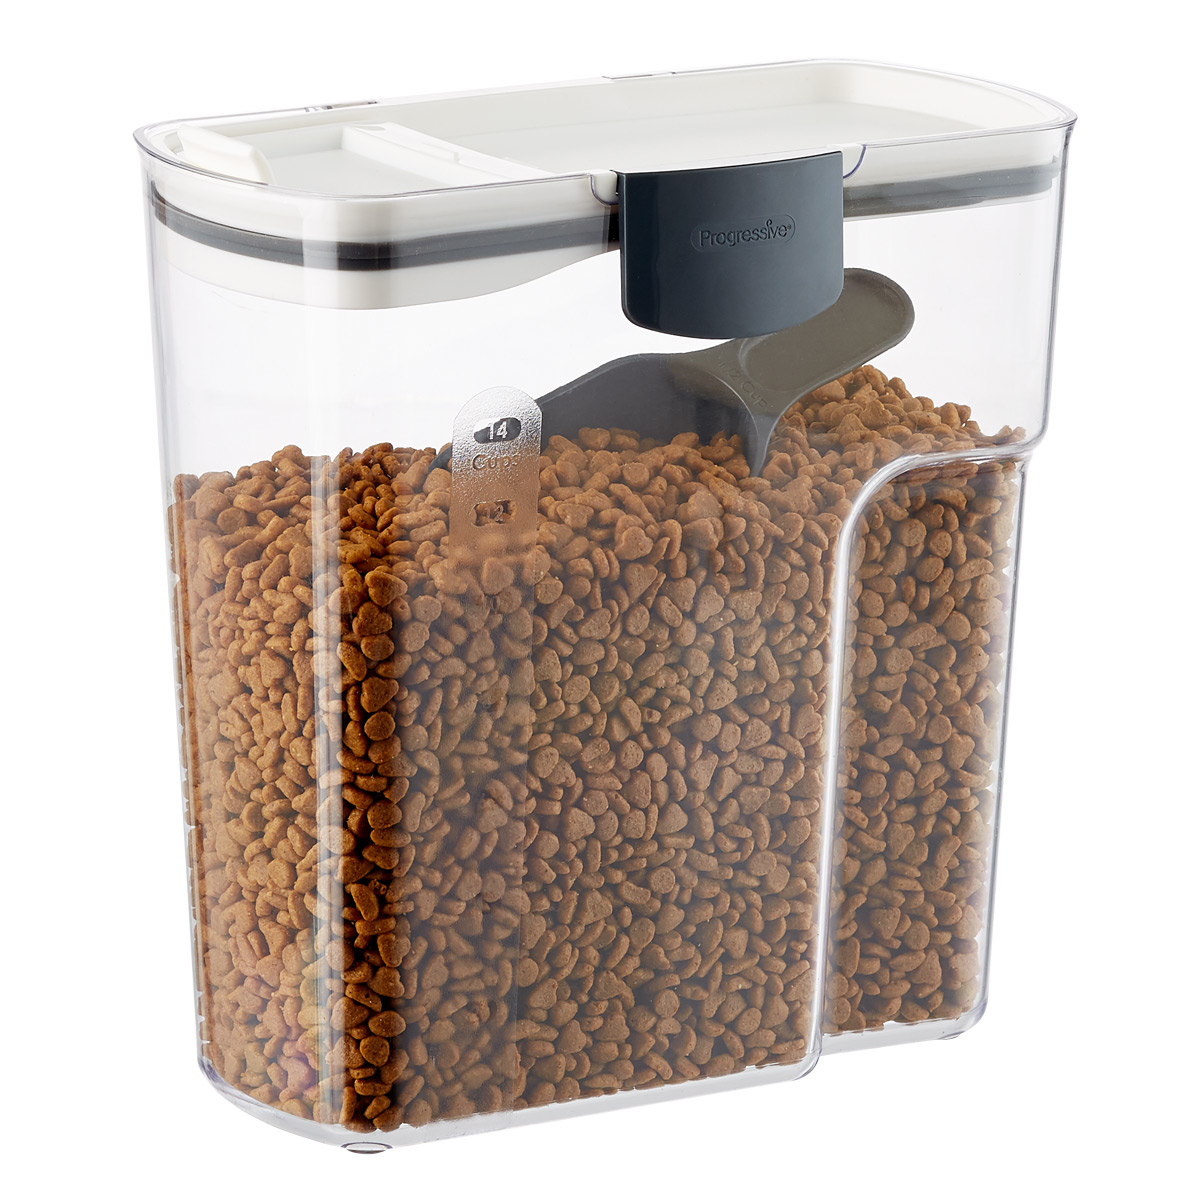 ProKeeper Pet Food Container | The Container Store